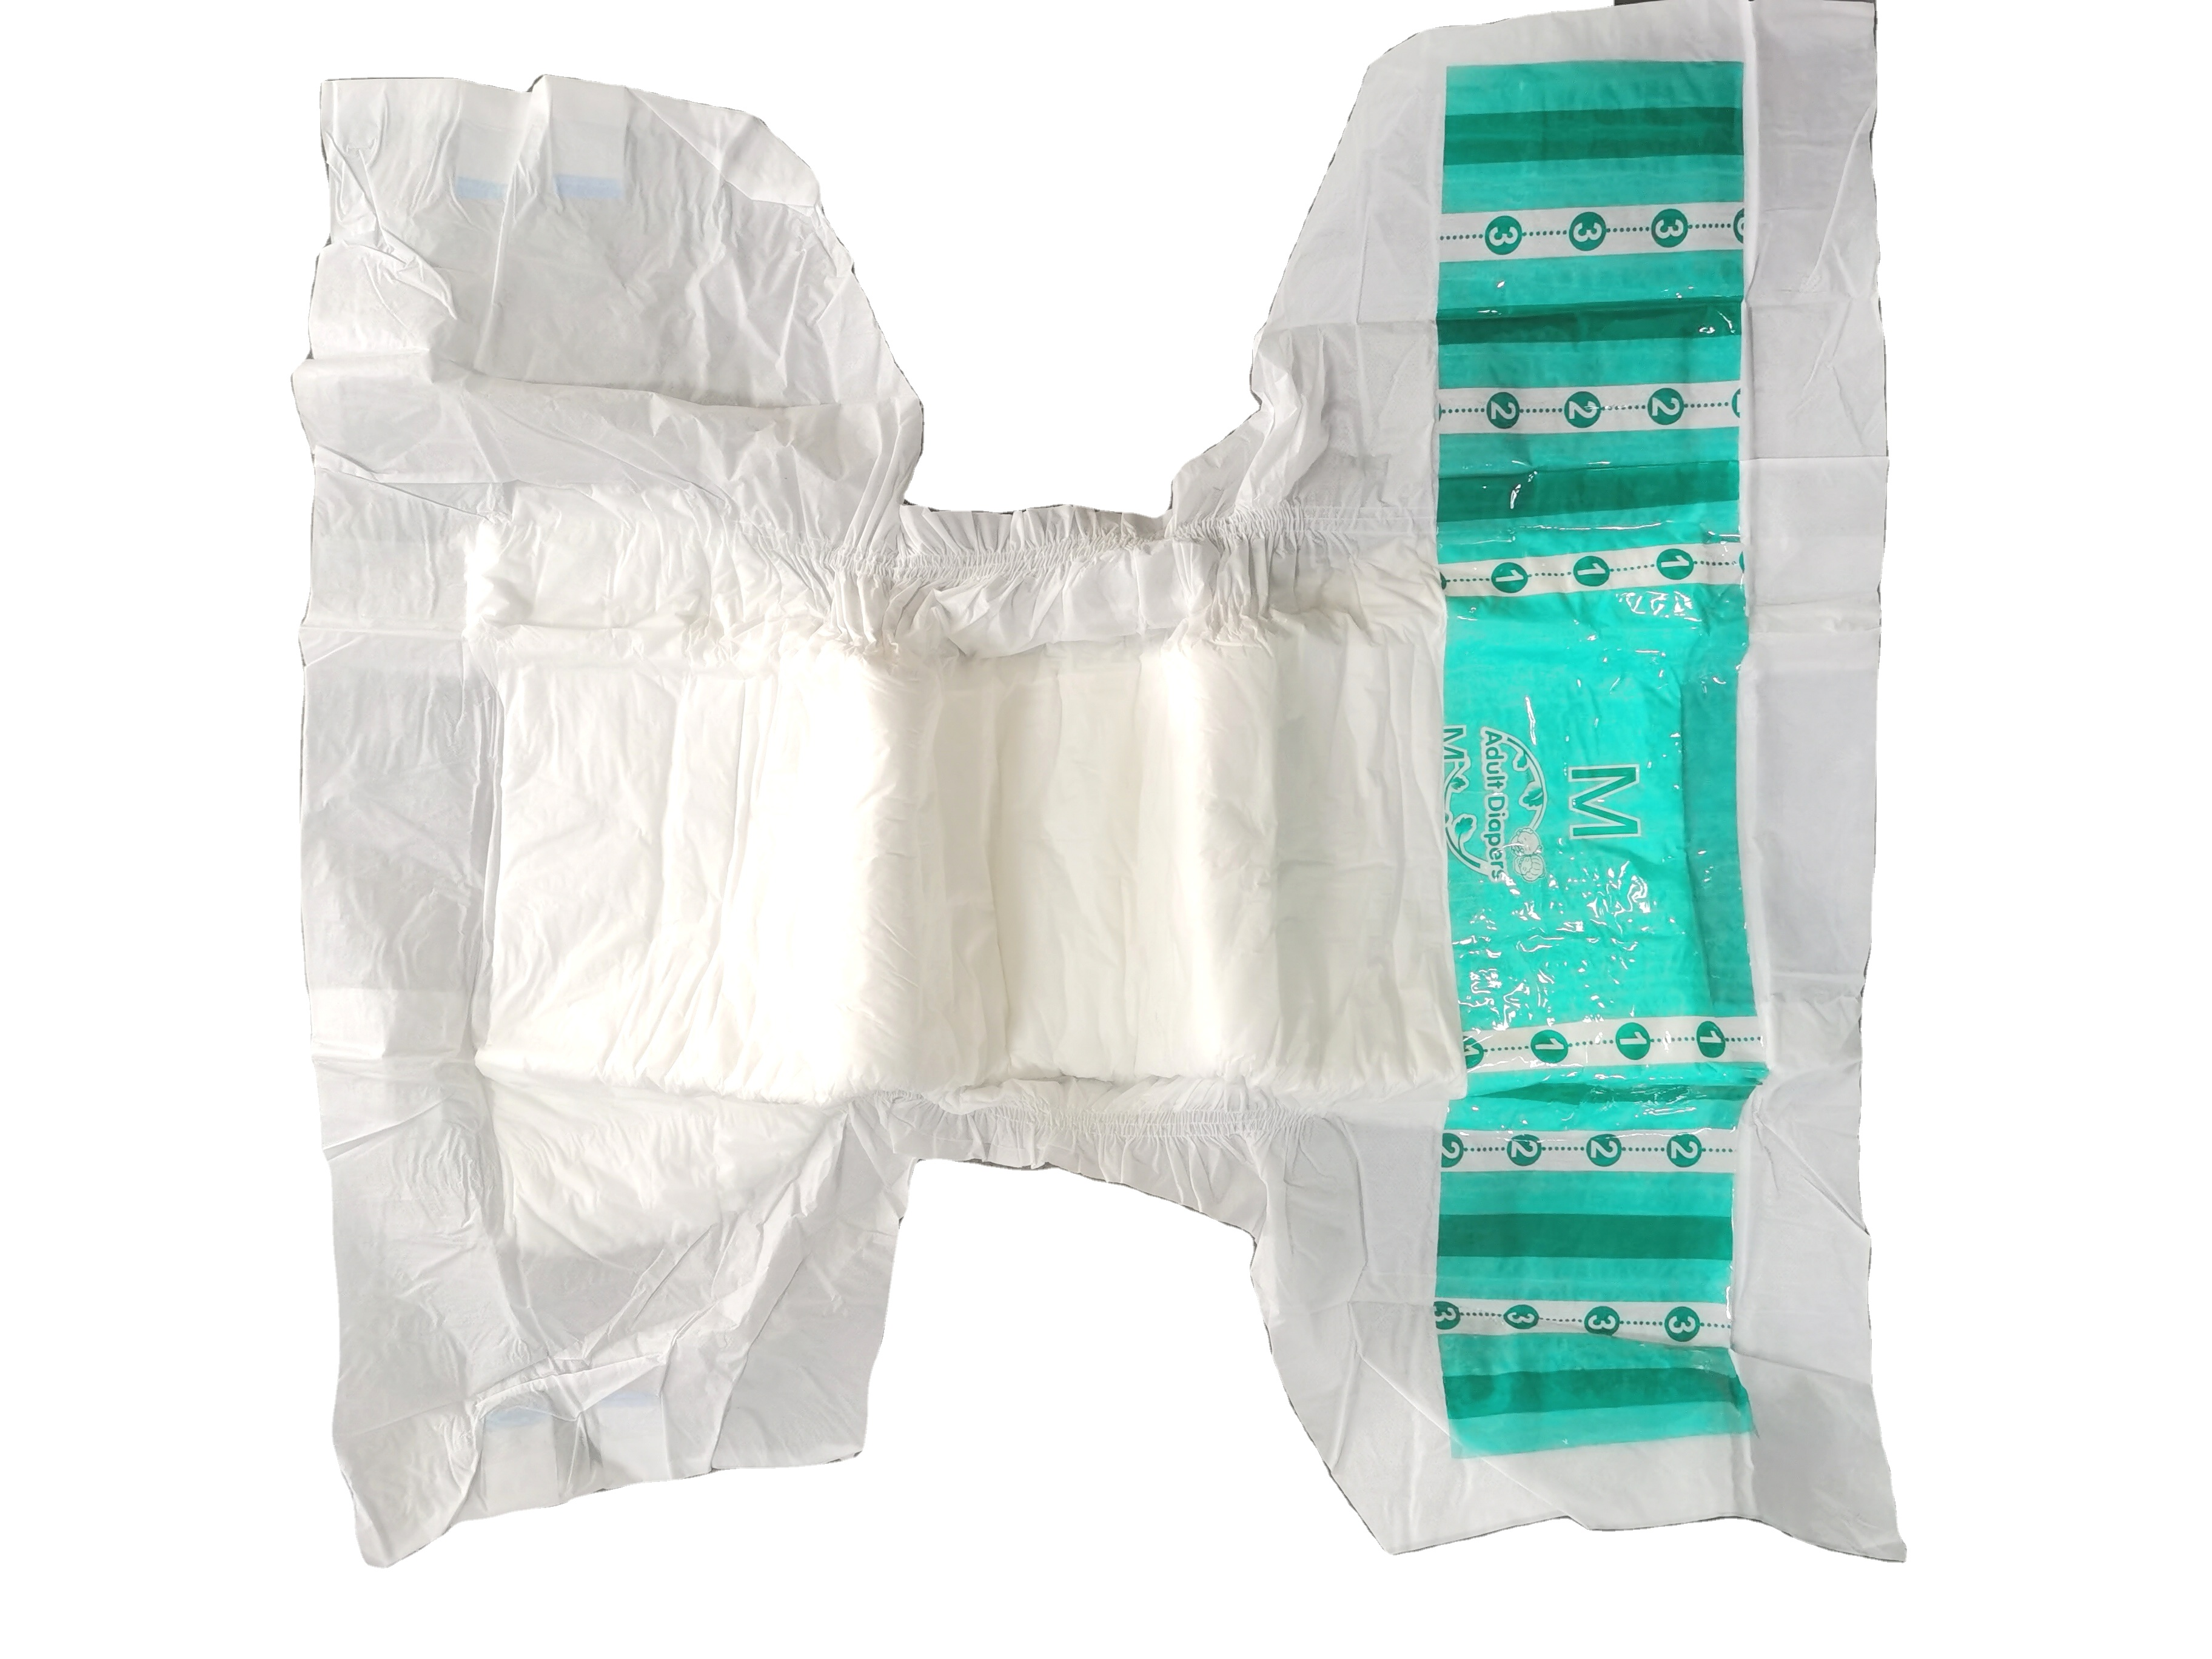 High Performance Adult Nappies Dischem - certainty adult diapers  abdl diapers adjustable diapers – Ensha